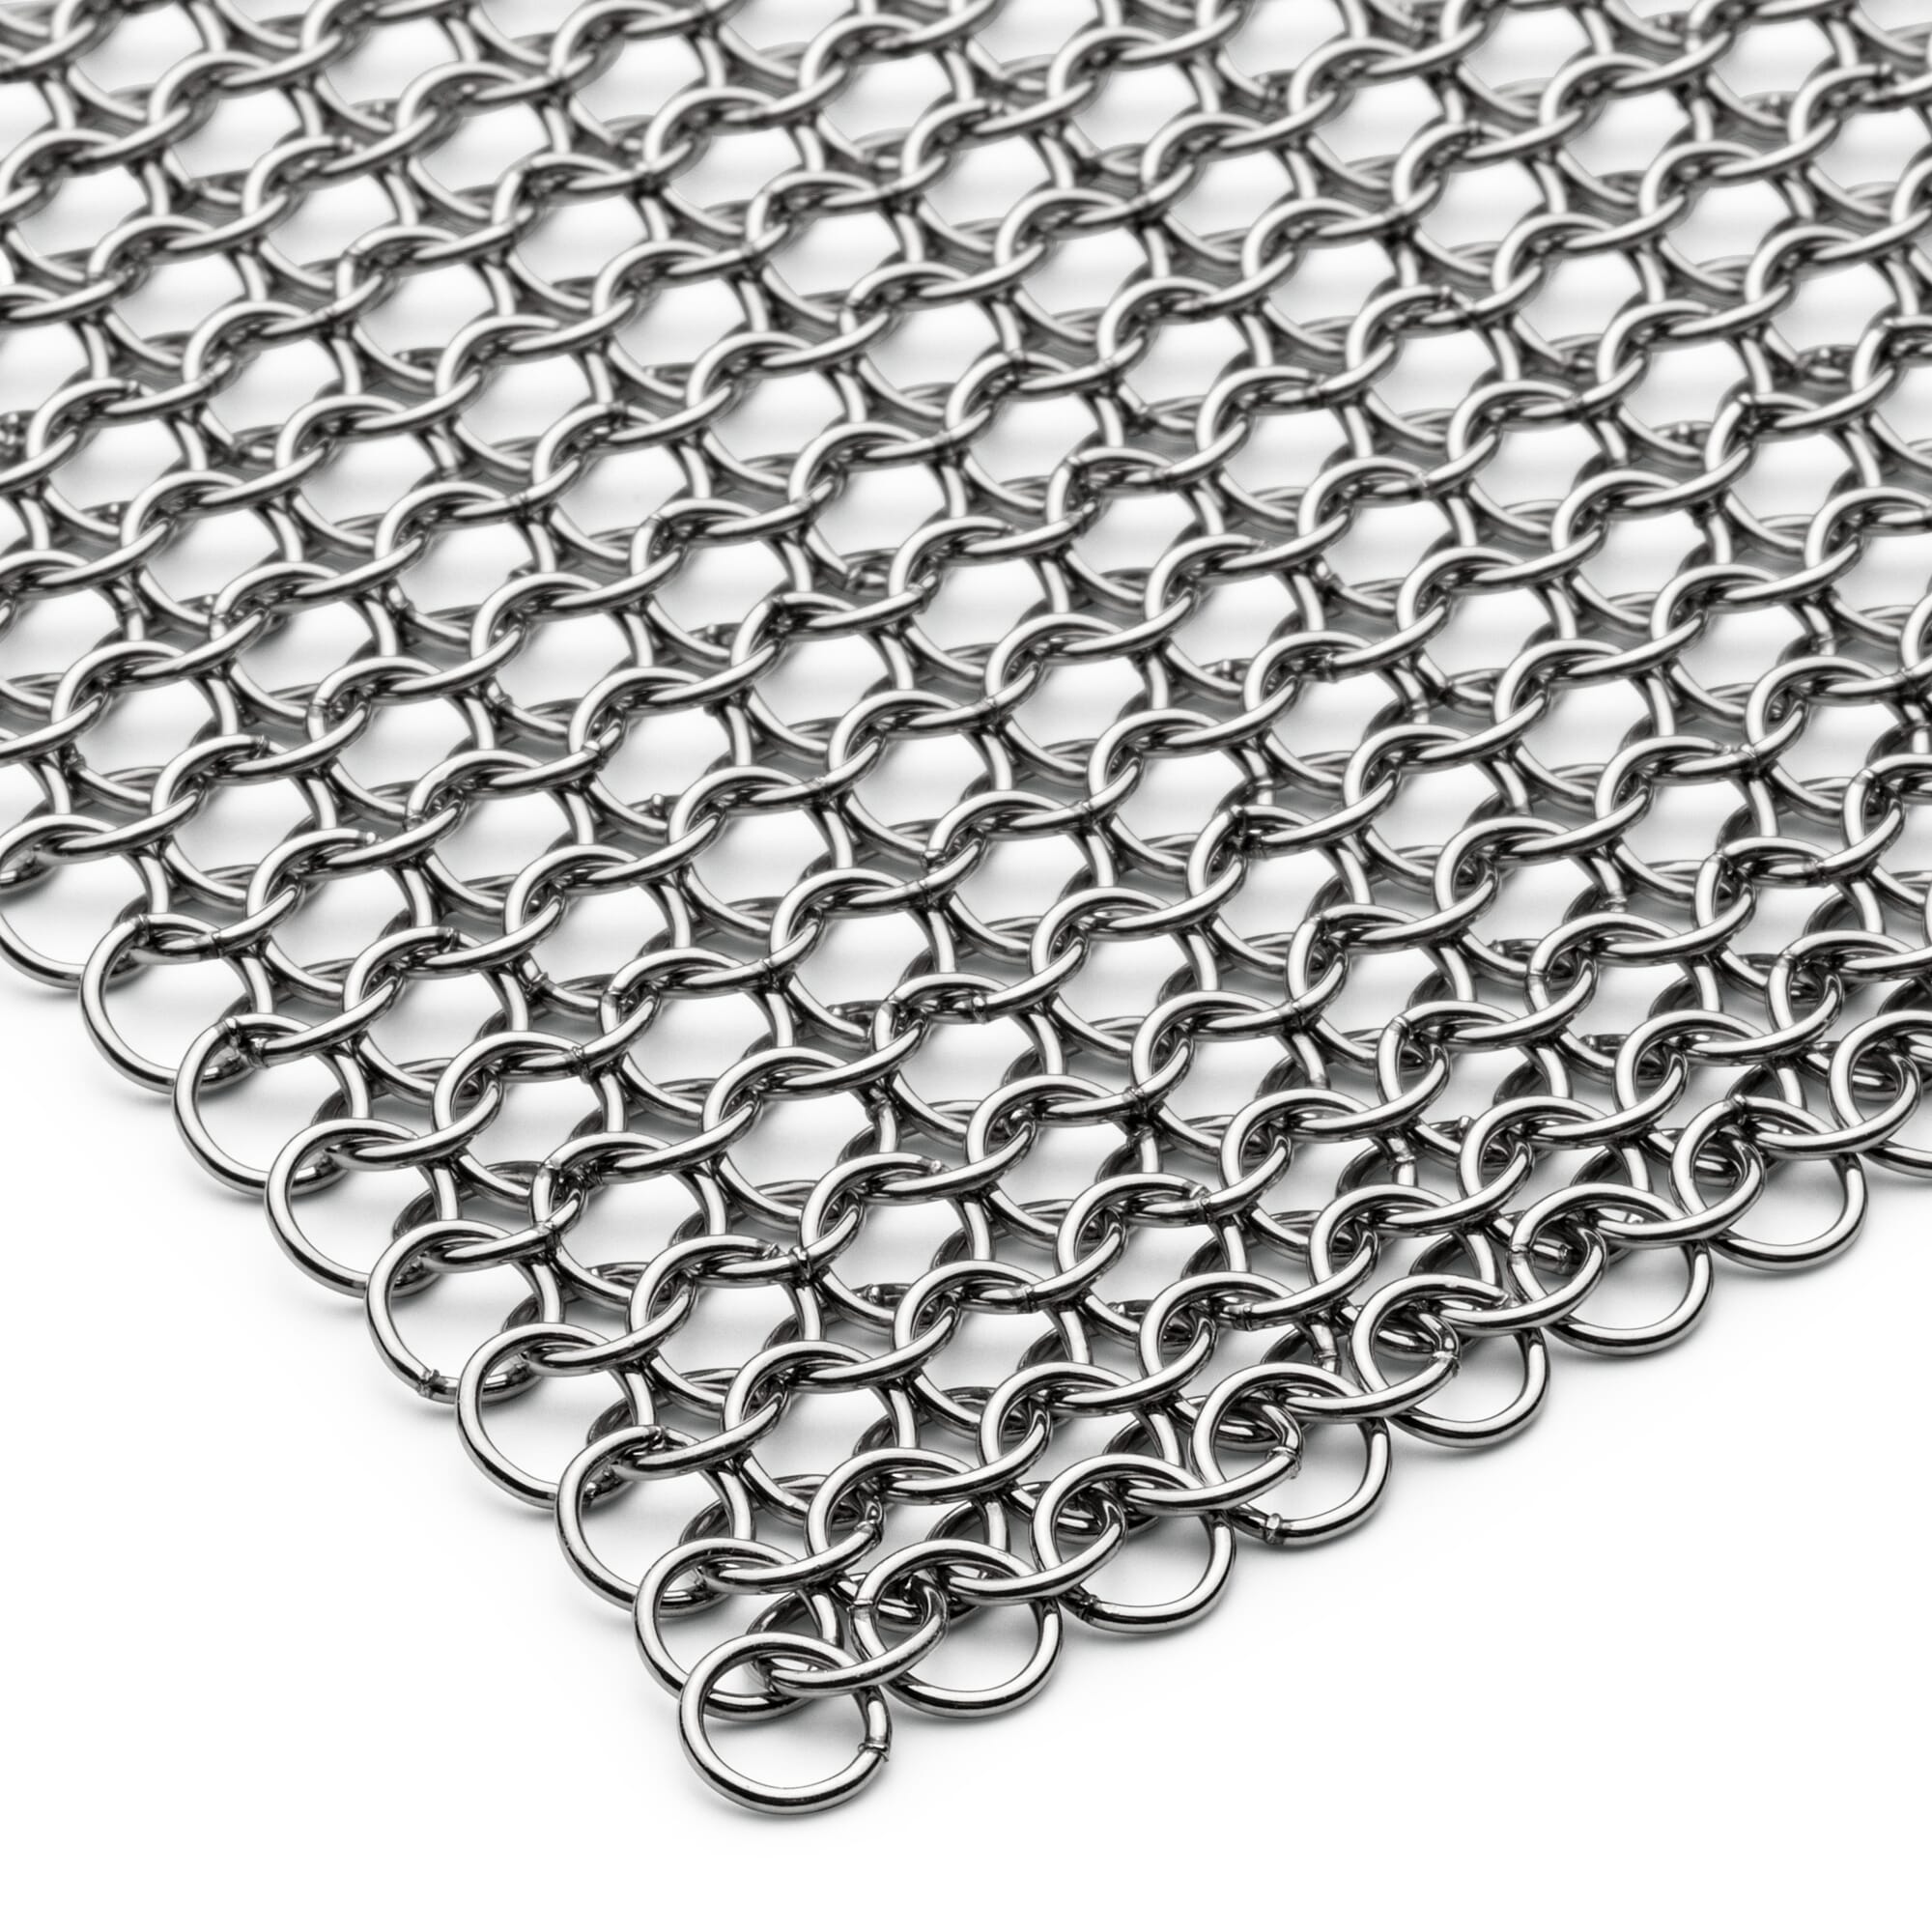 What To Know About Wire Mesh Cleaning